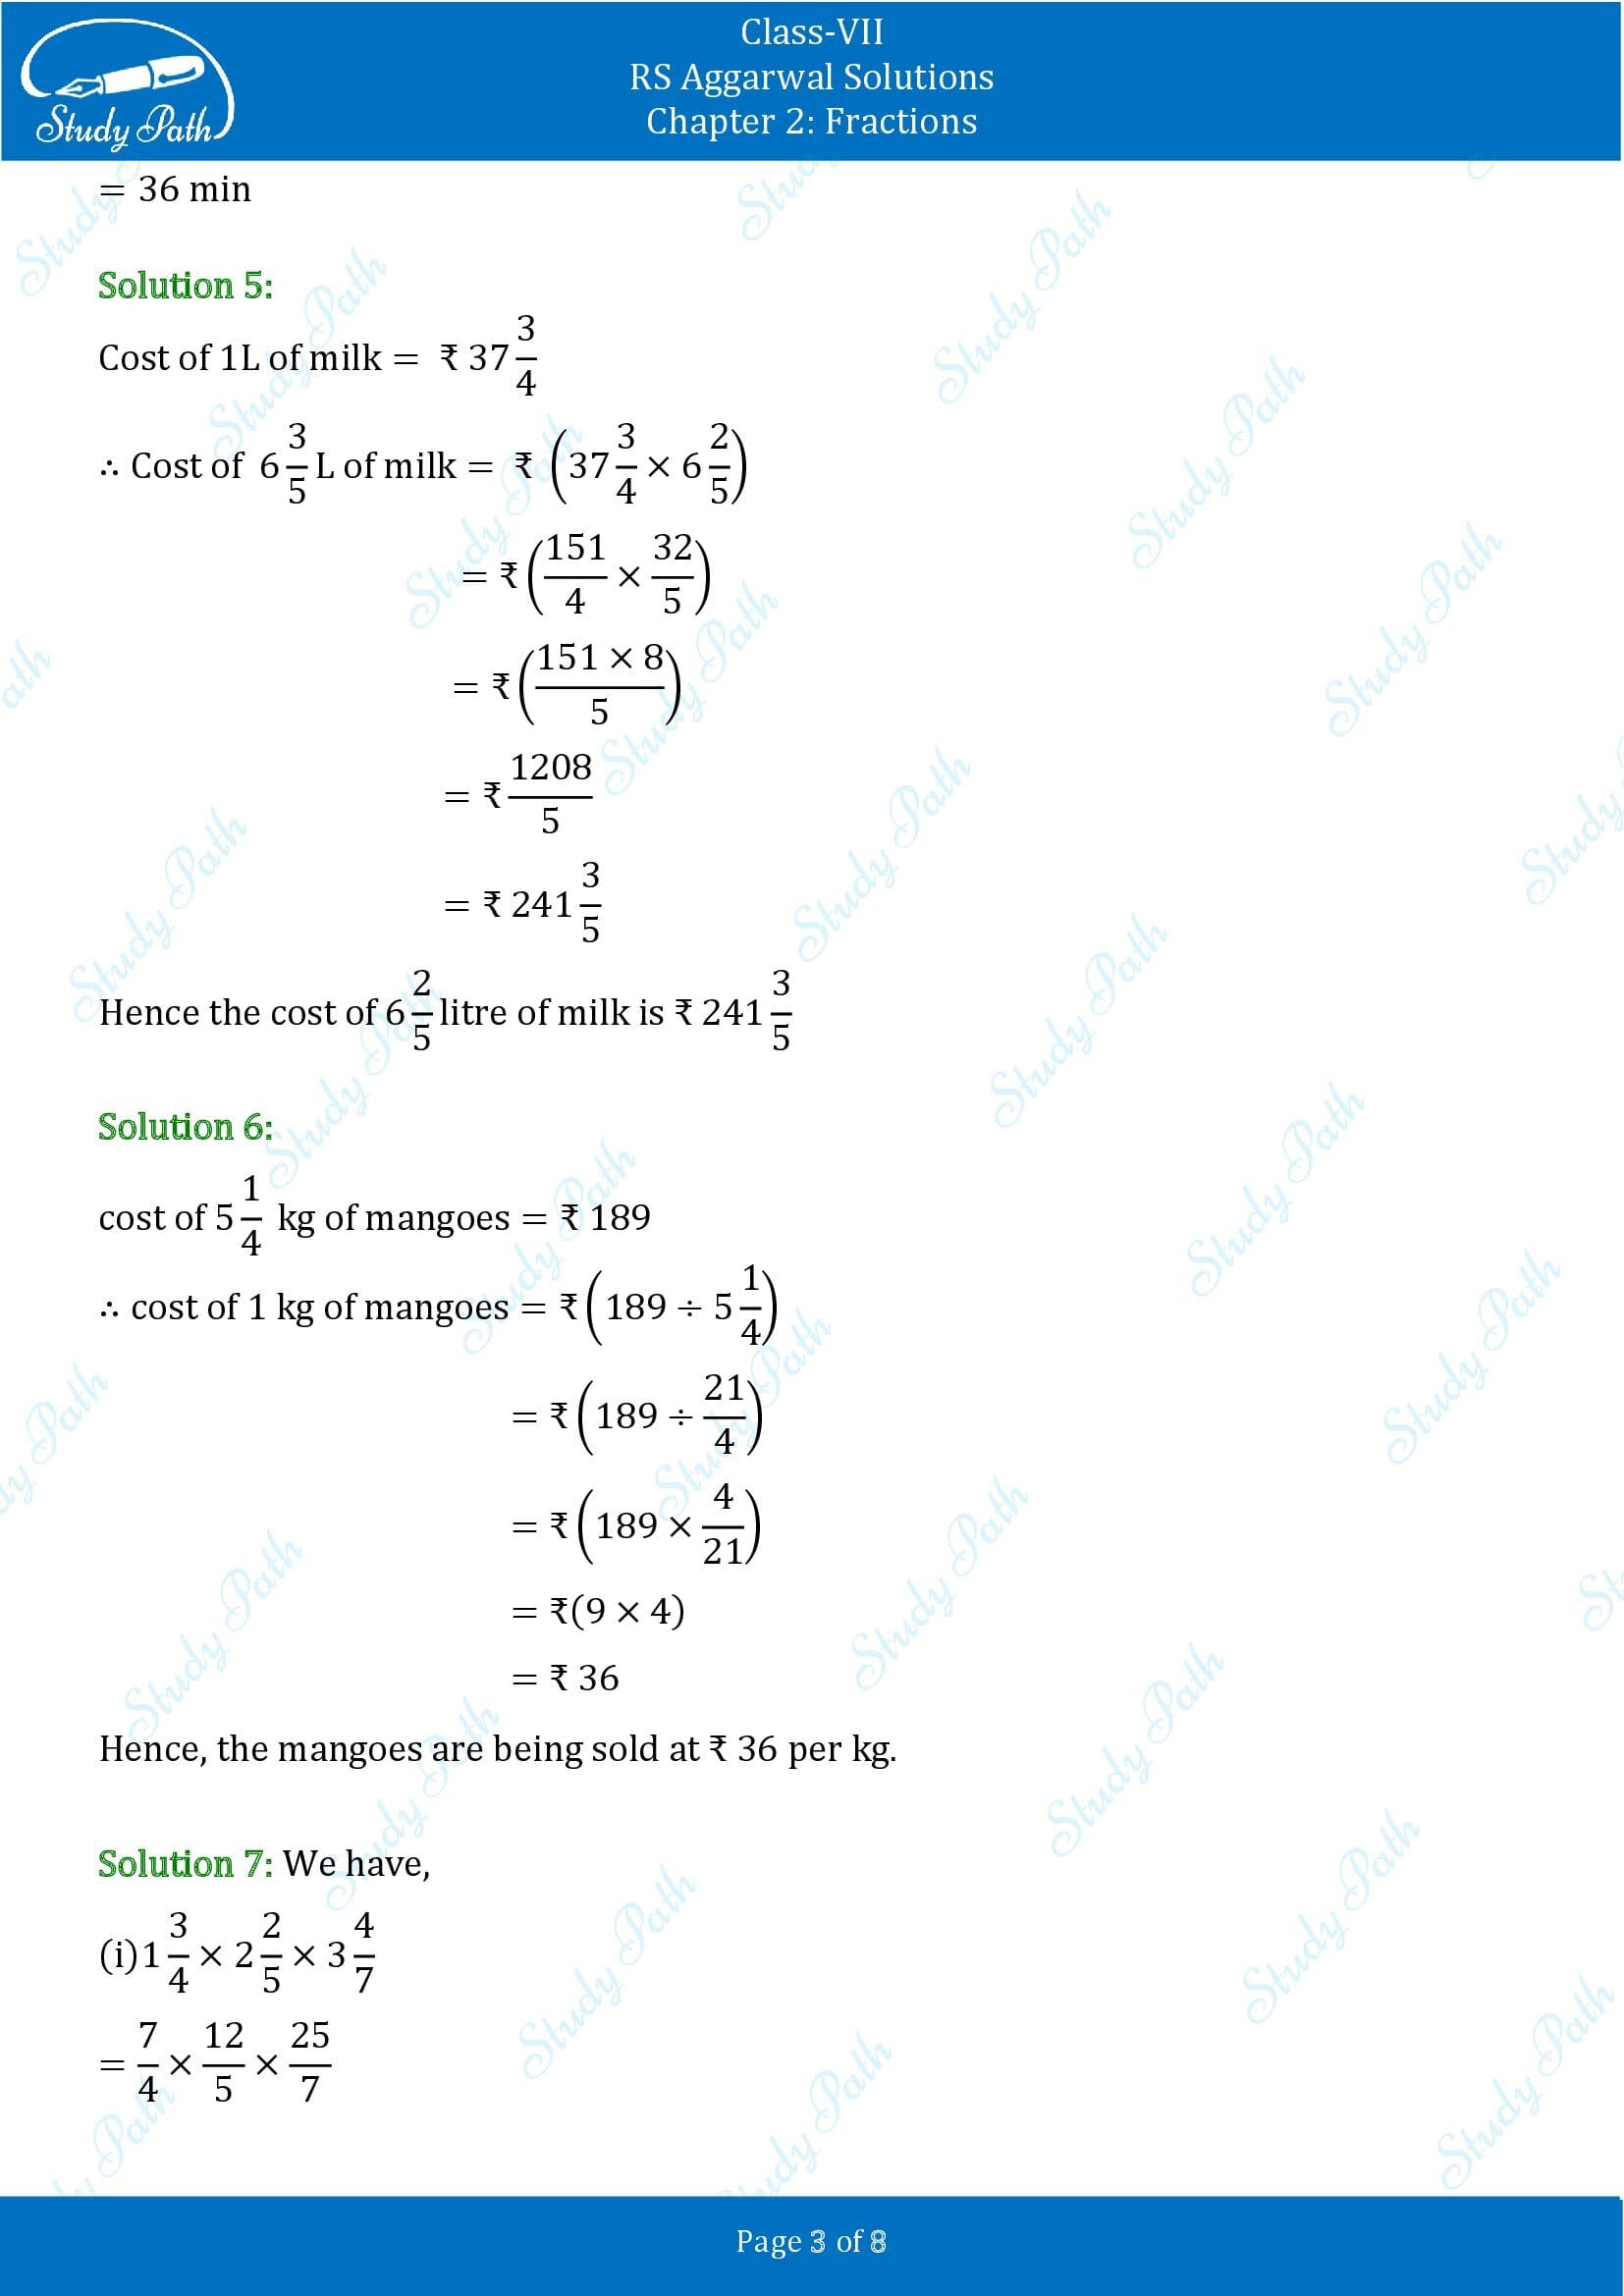 RS Aggarwal Solutions Class 7 Chapter 2 Fractions Test Paper 00003